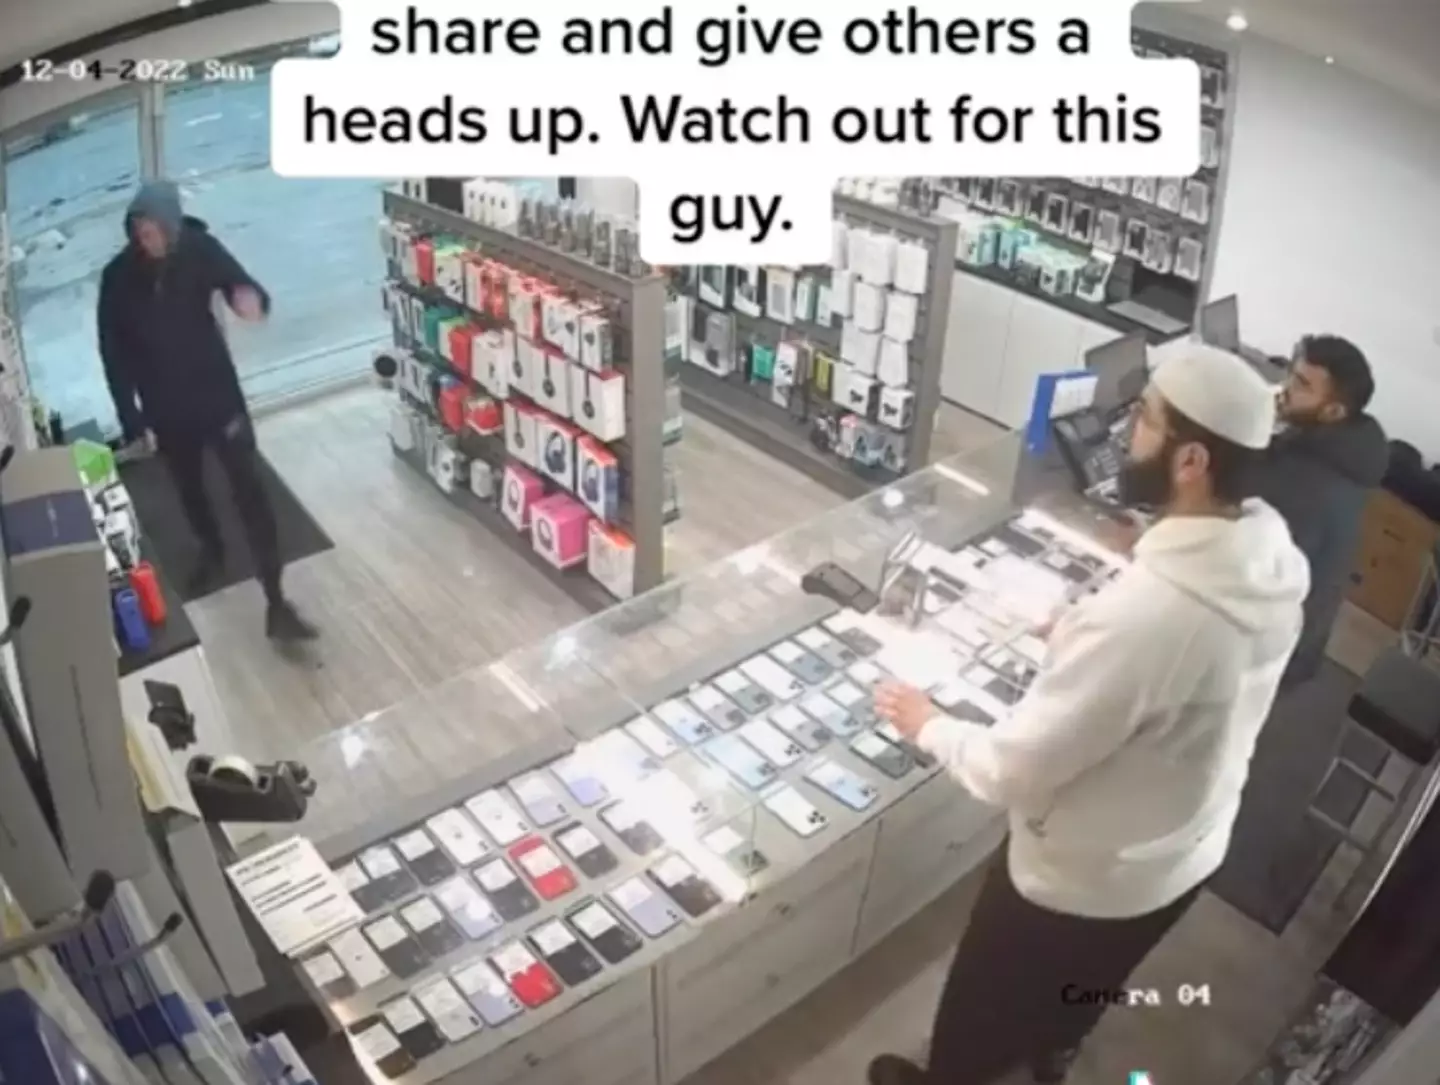 Some users on social media questioned why the shopkeepers didn't punish the thief more harshly.